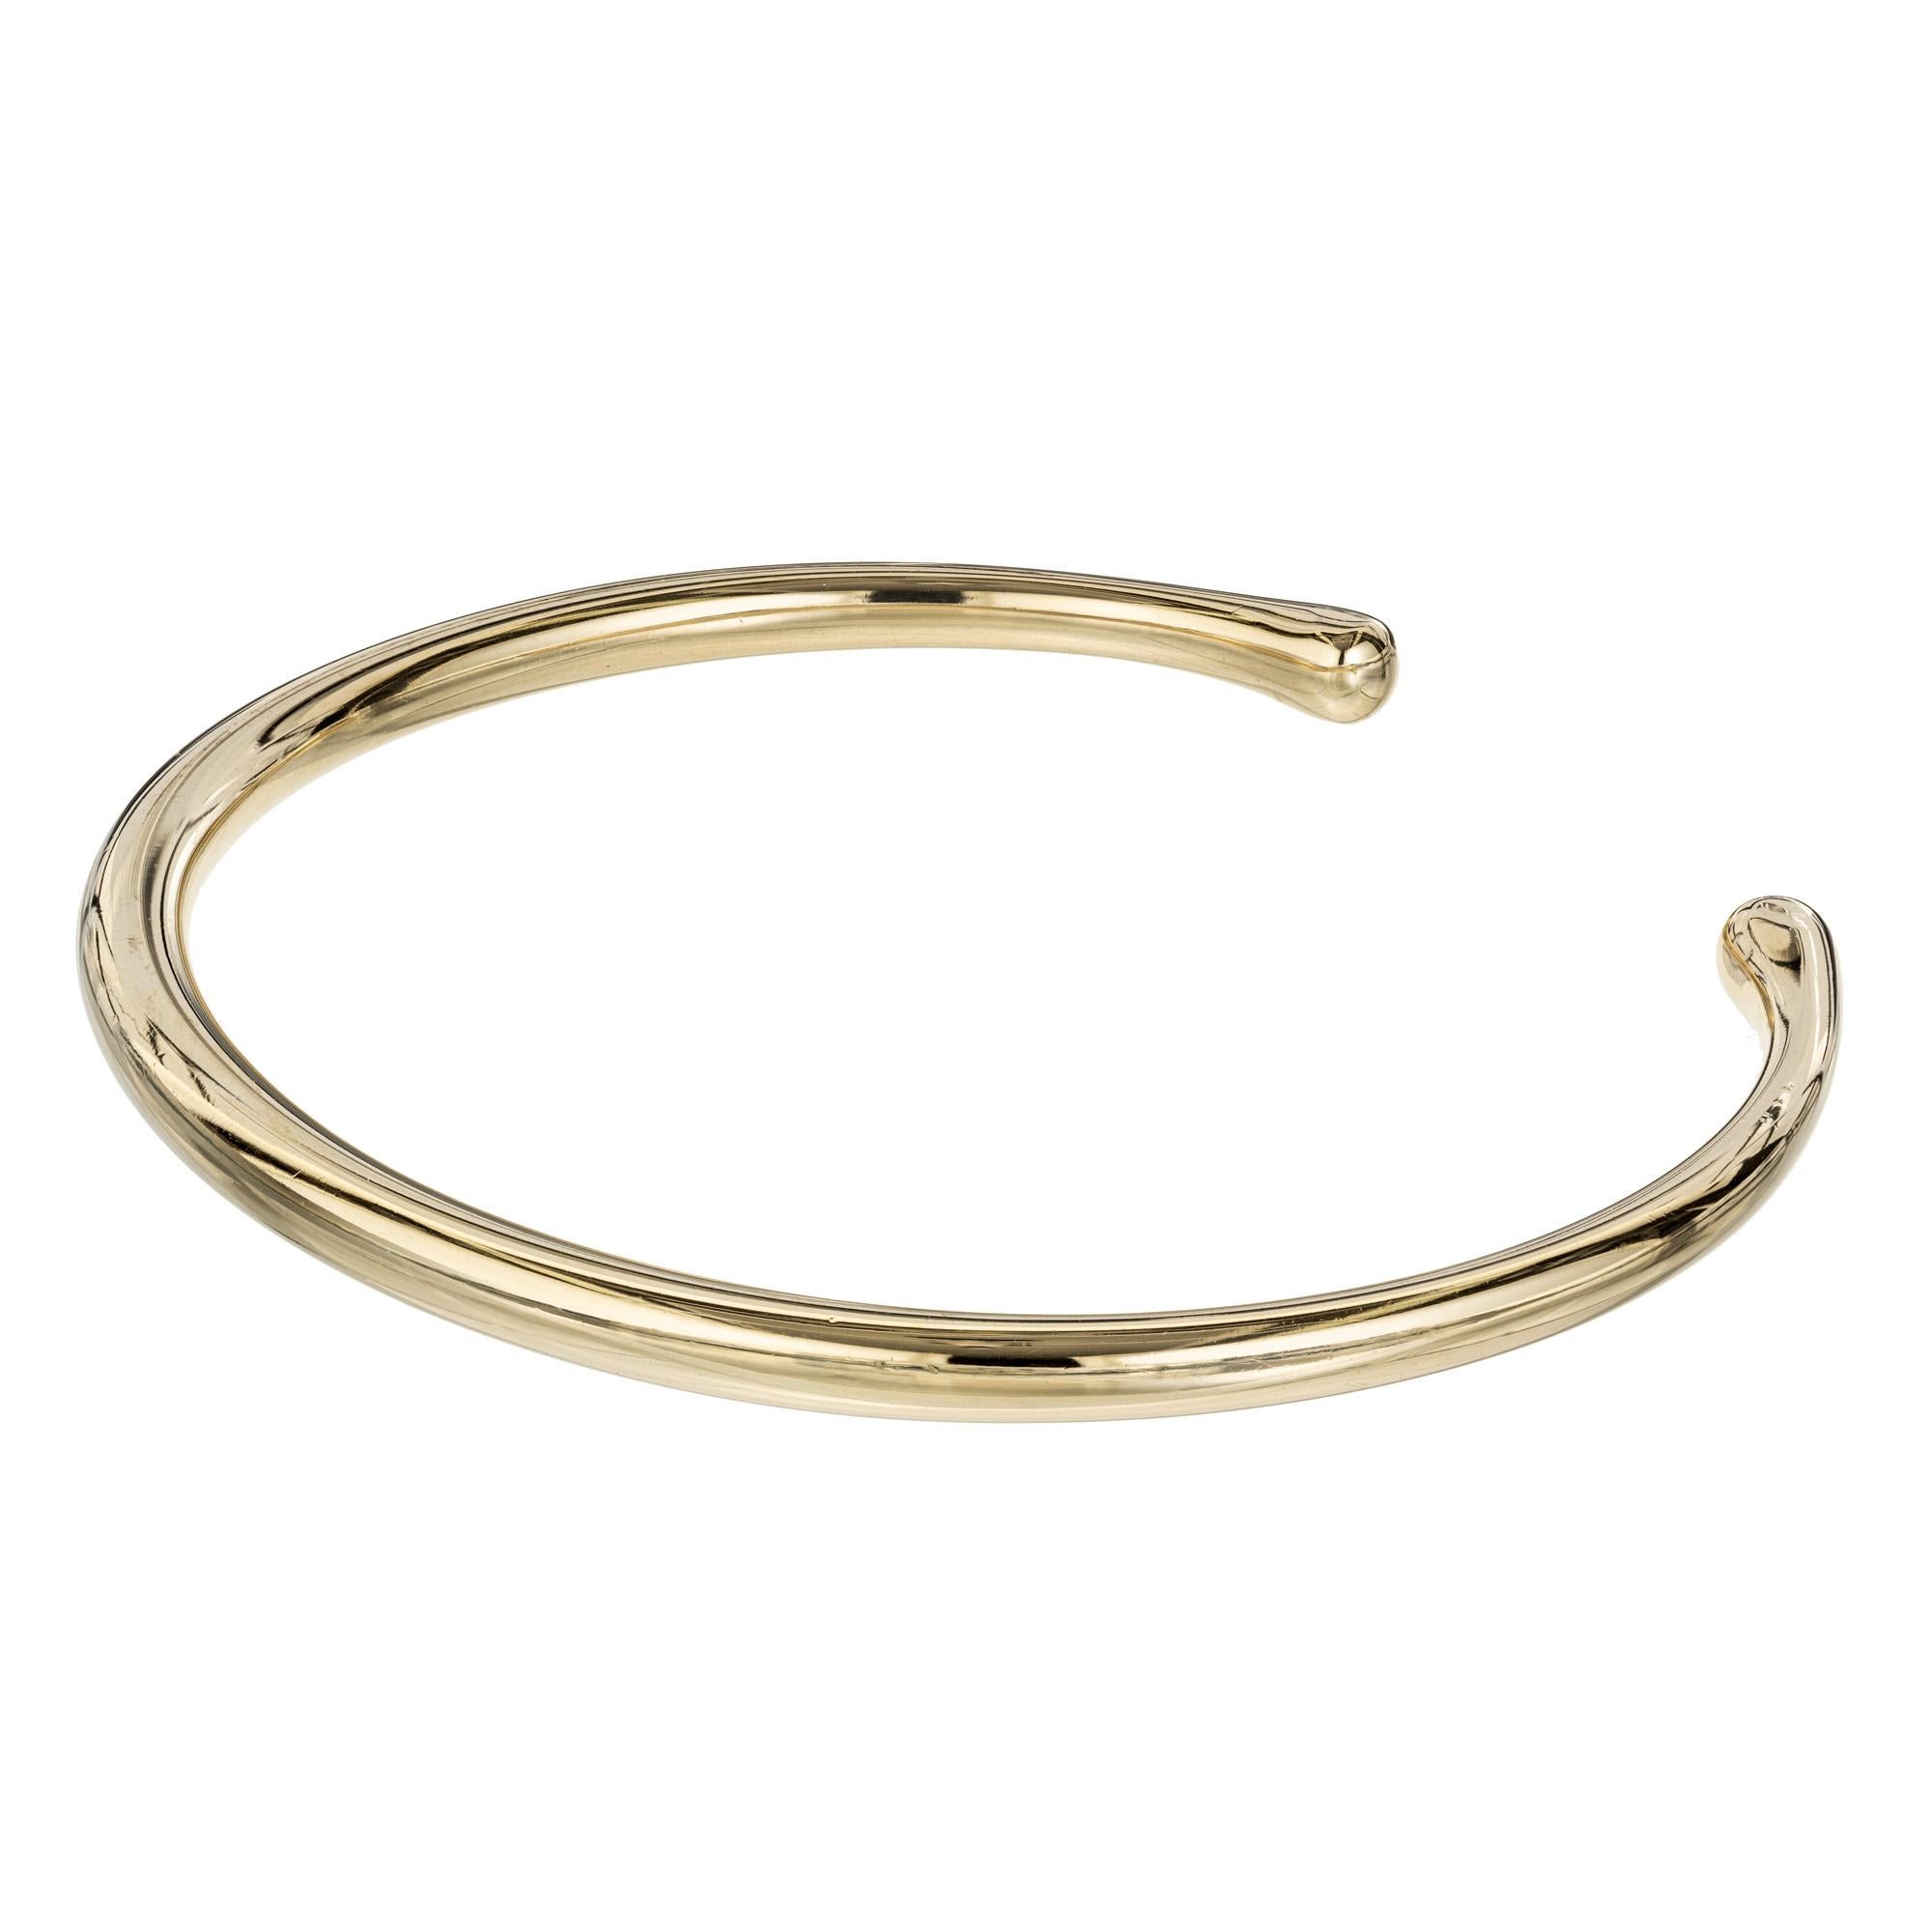 Georg Jensen 18k yellow gold cuff style bracelet that tapers from center to ends. 7 inch. 

18k yellow gold 
Stamped: 18k 750
Hallmark: Georg Jensen
29.2 grams
Width: 4.0mm
Thickness/depth: 4.1mm
Inside dimensions: 2.5 inches x 2.25 inches
Shape: